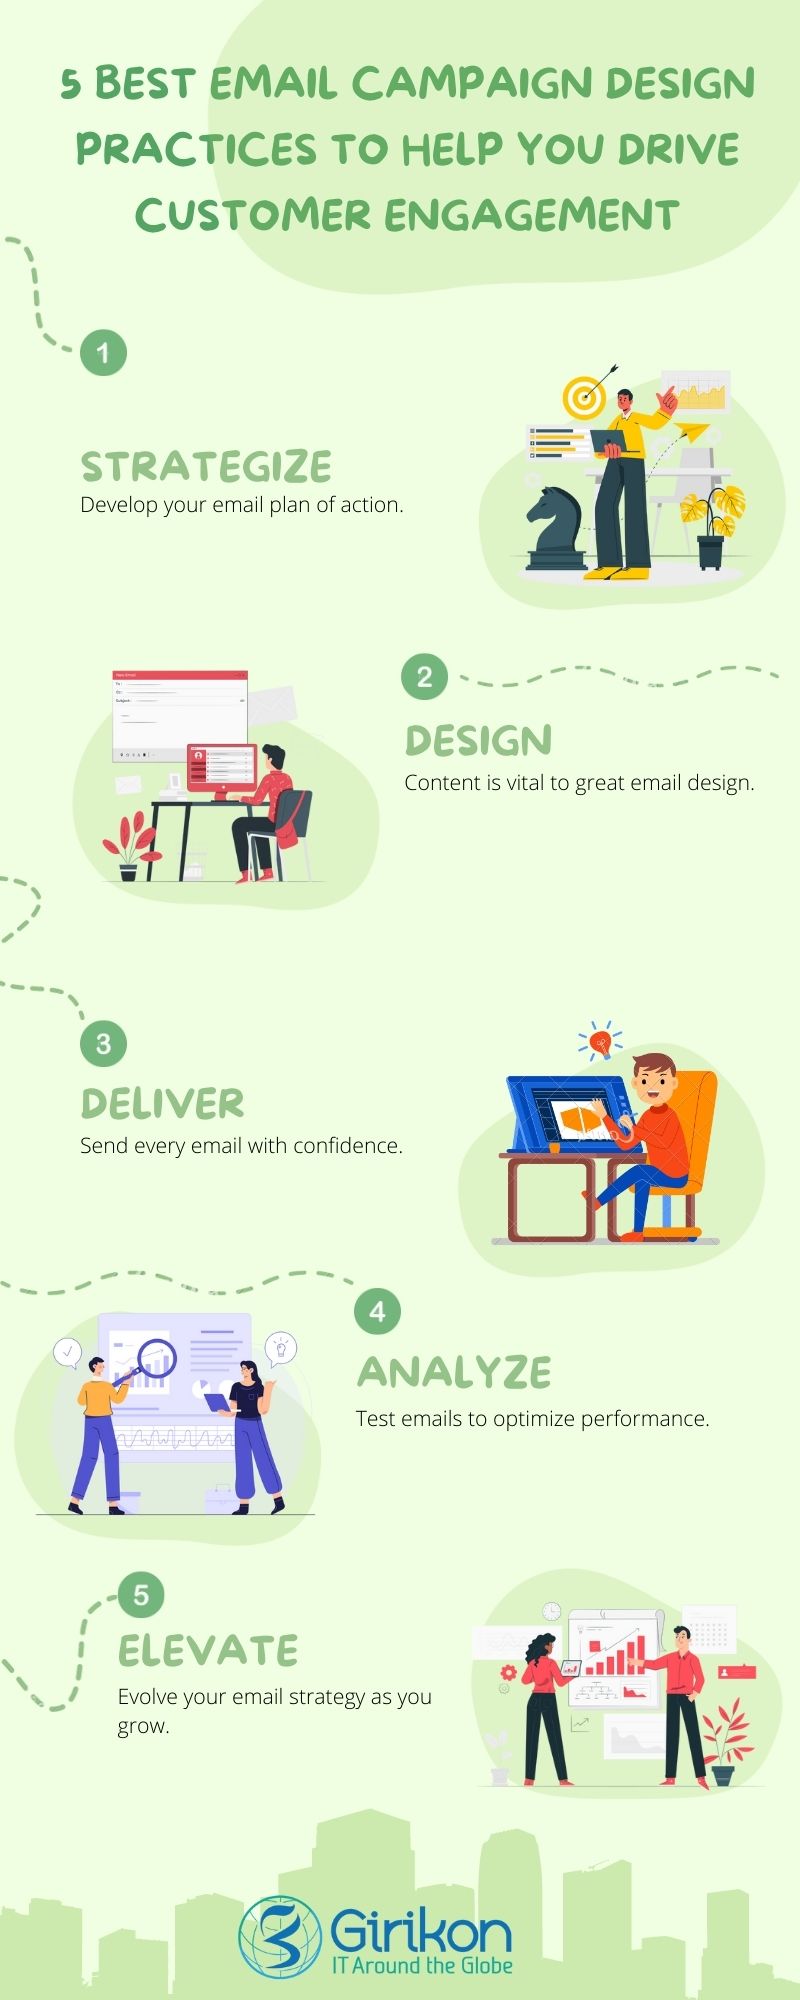 5 best email campaign design practices to help you drive customer engagement at scale